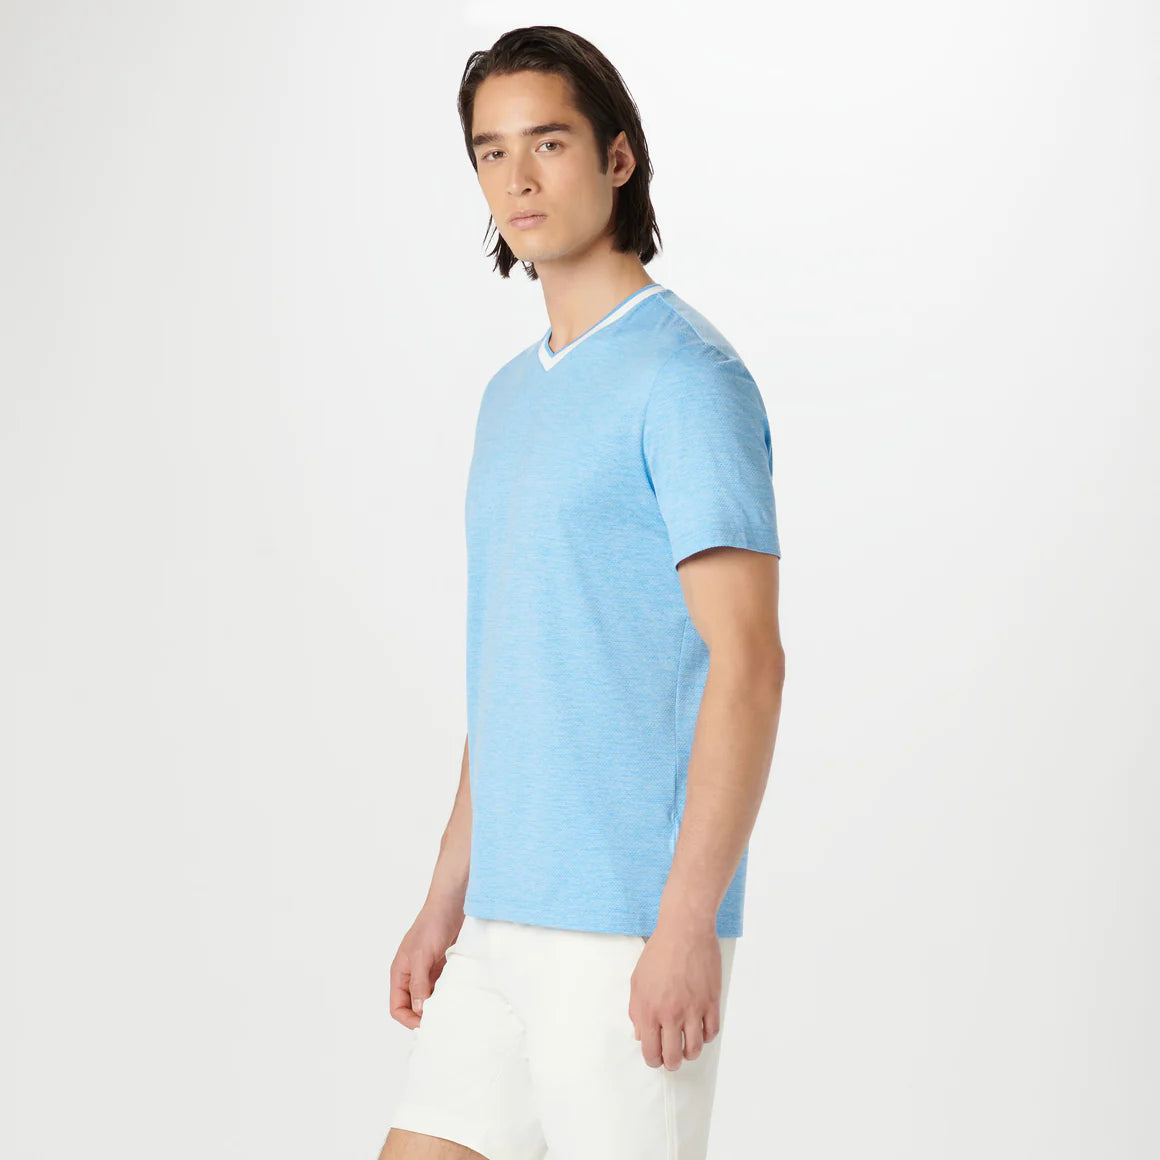 This performance short-sleeved V-neck shirt features a stylish speckled heather pattern with contrast neckline. Beyond style, this garment offers UV50 SPF protection, making it perfect for outdoor activities.